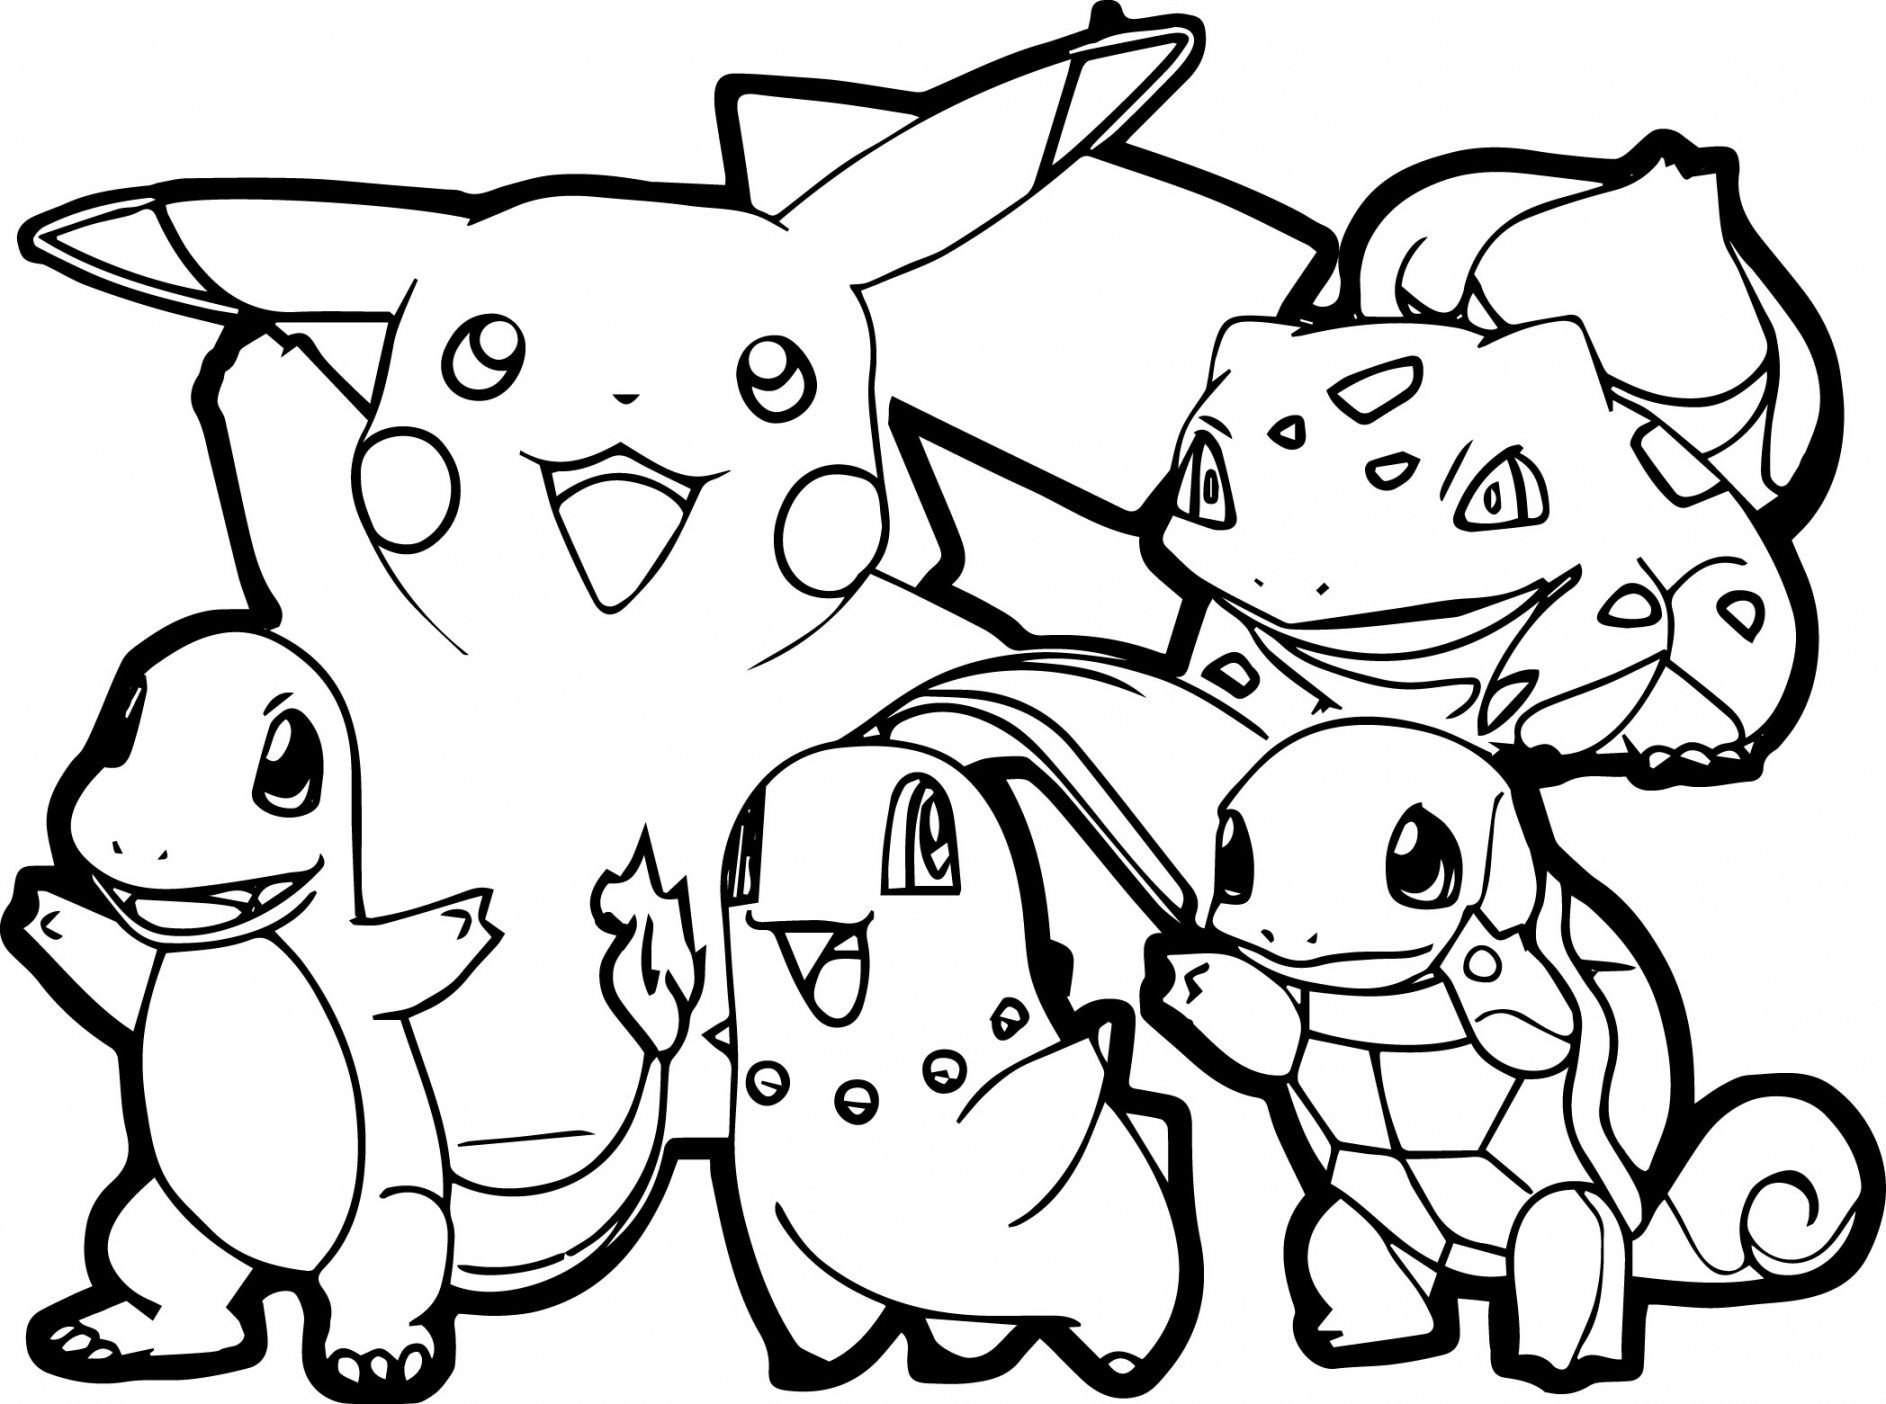 Free Printable Coloring Pages Pokemon - Printable - Pokemon for children - All Pokemon coloring pages Kids Coloring Pages